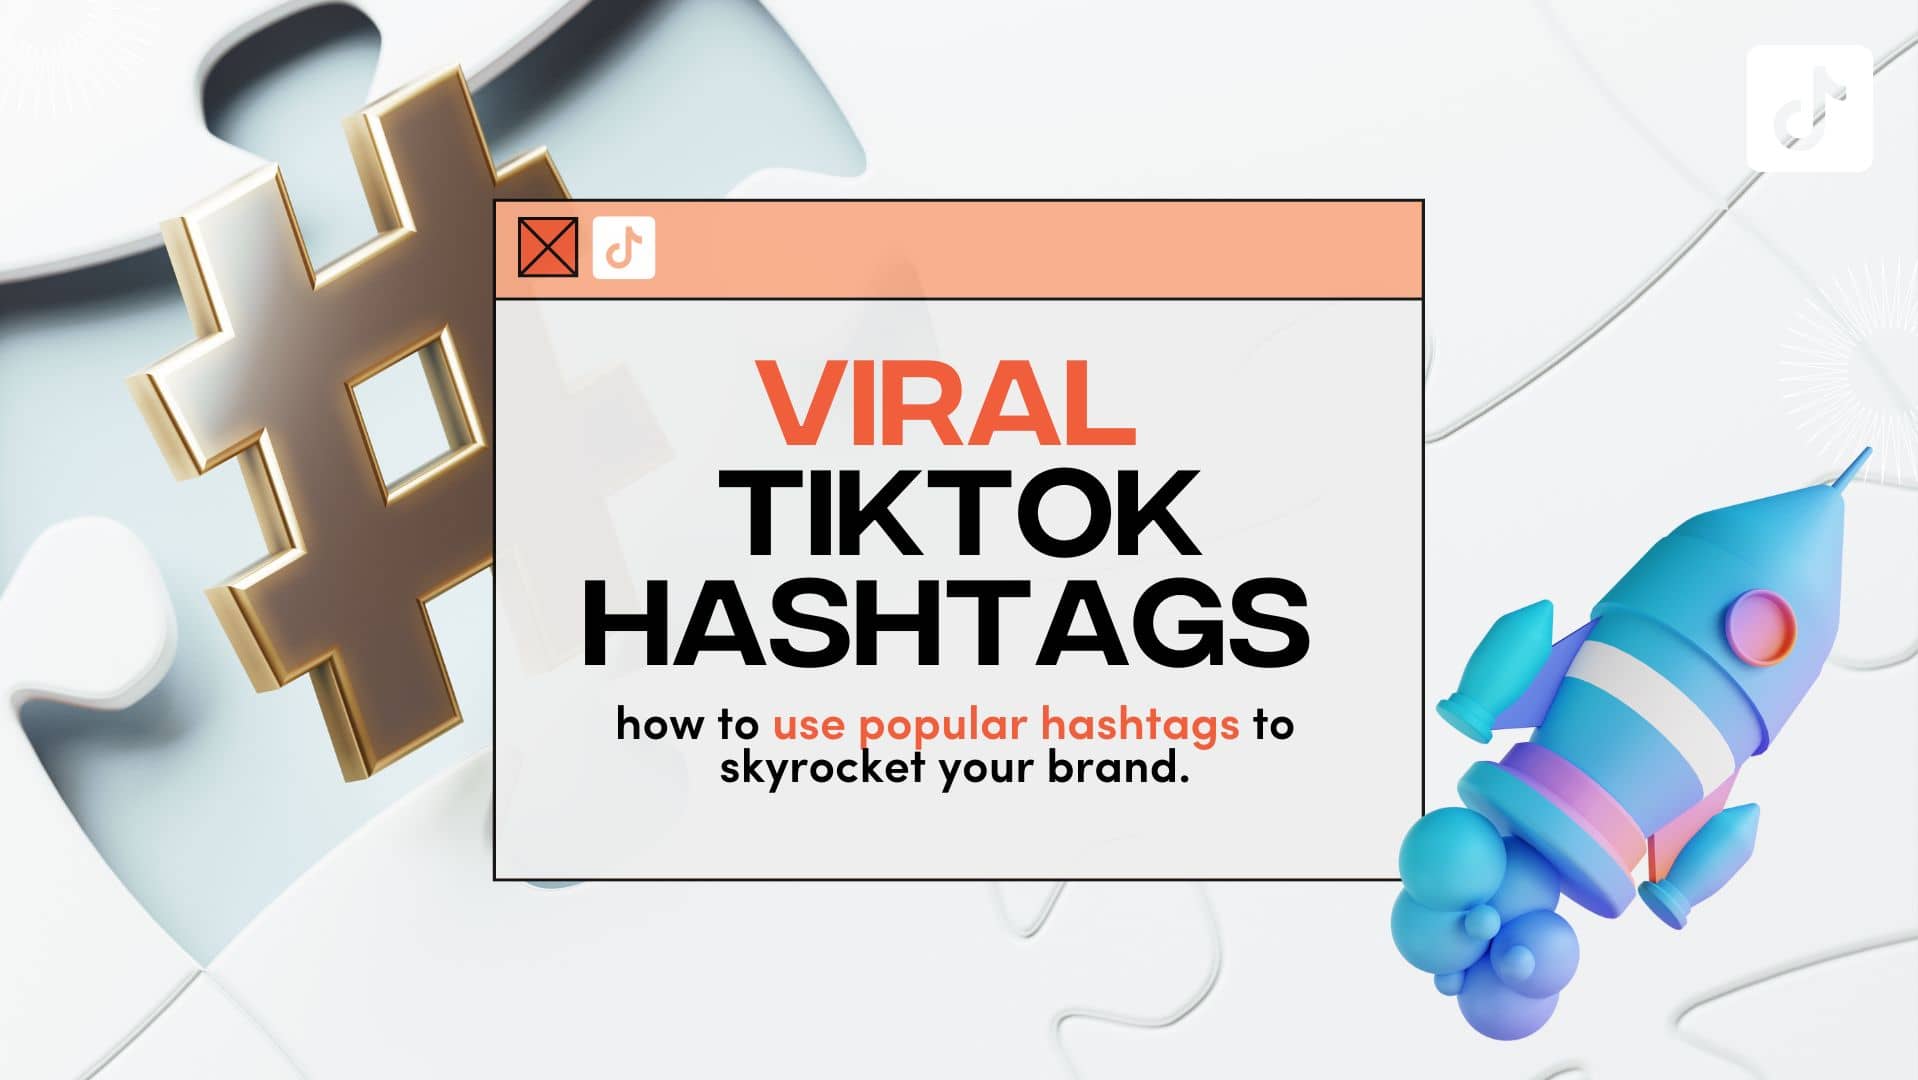 Fanbytes | Viral TikTok hashtags: how to use popular hashtags to skyrocket your brand